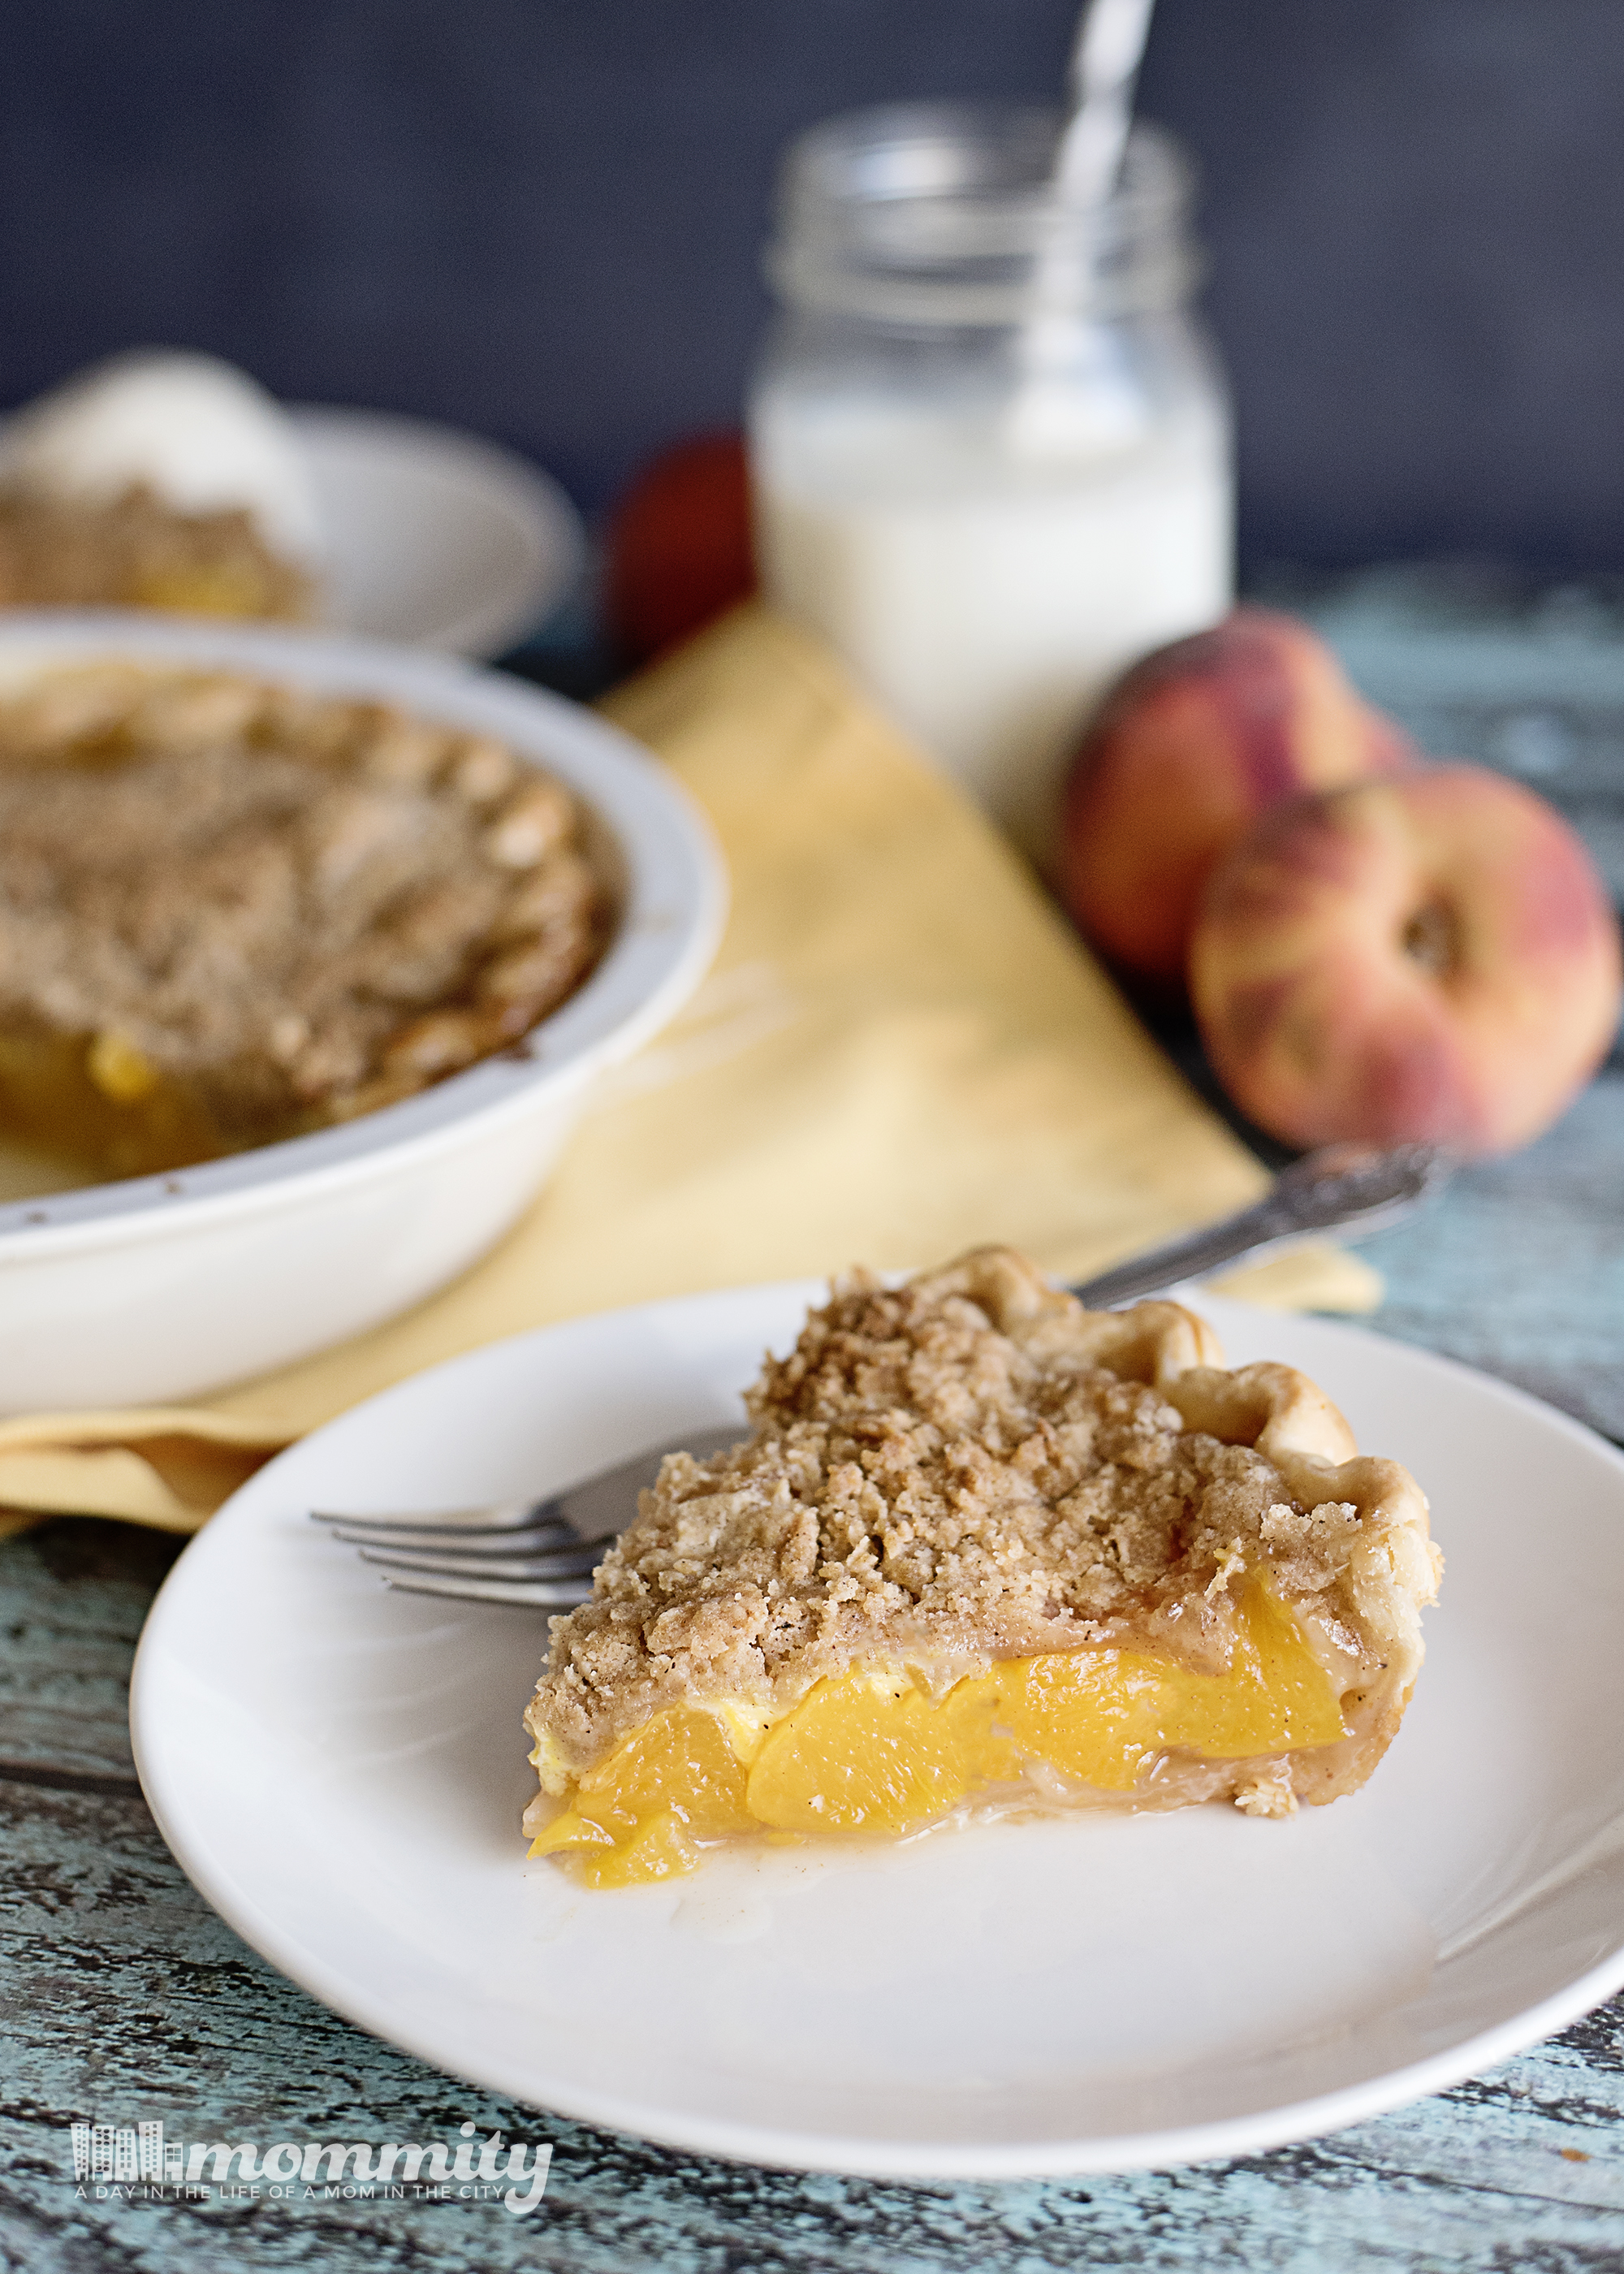 Delicious Peach Crumble Pie Recipe with Brown Sugar Topping